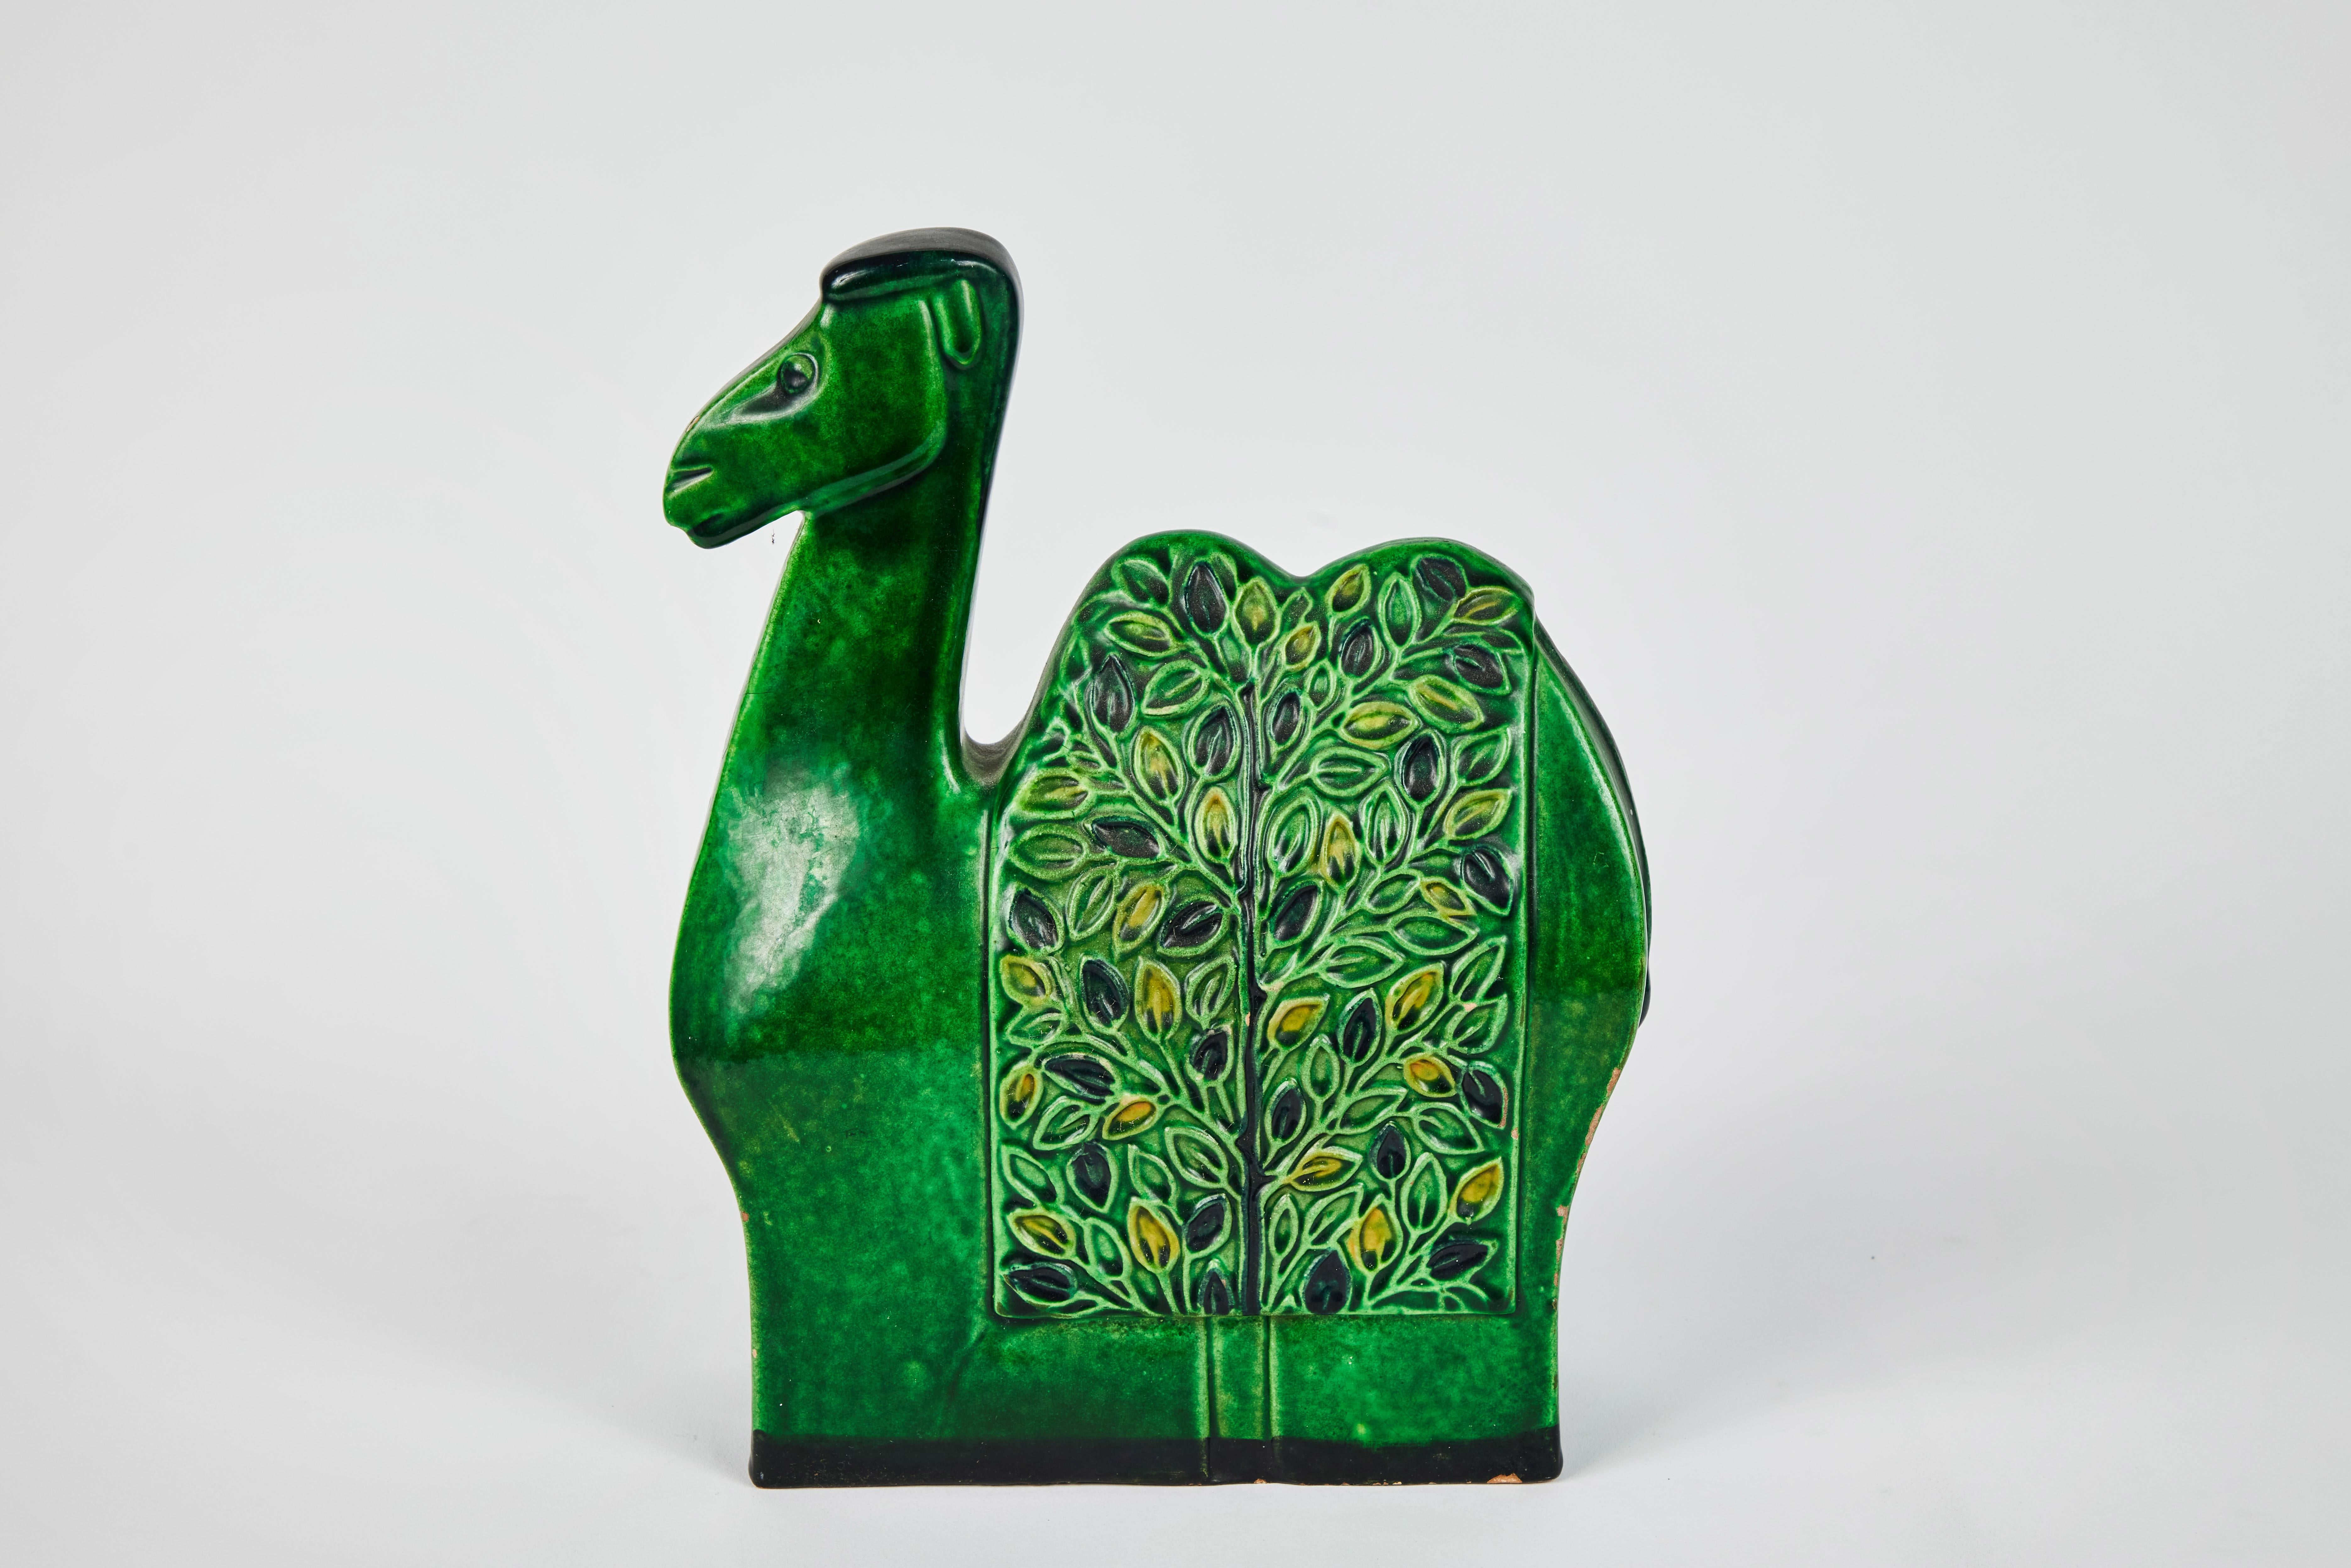 1960s Bitossi camel sculpture by Aldo Londi with Signature. This rare and sculptural Italian ceramic vessel is executed in green glazed ceramic with geometric embossed flower designs. A refined yet whimsical design characteristic of the best Italian